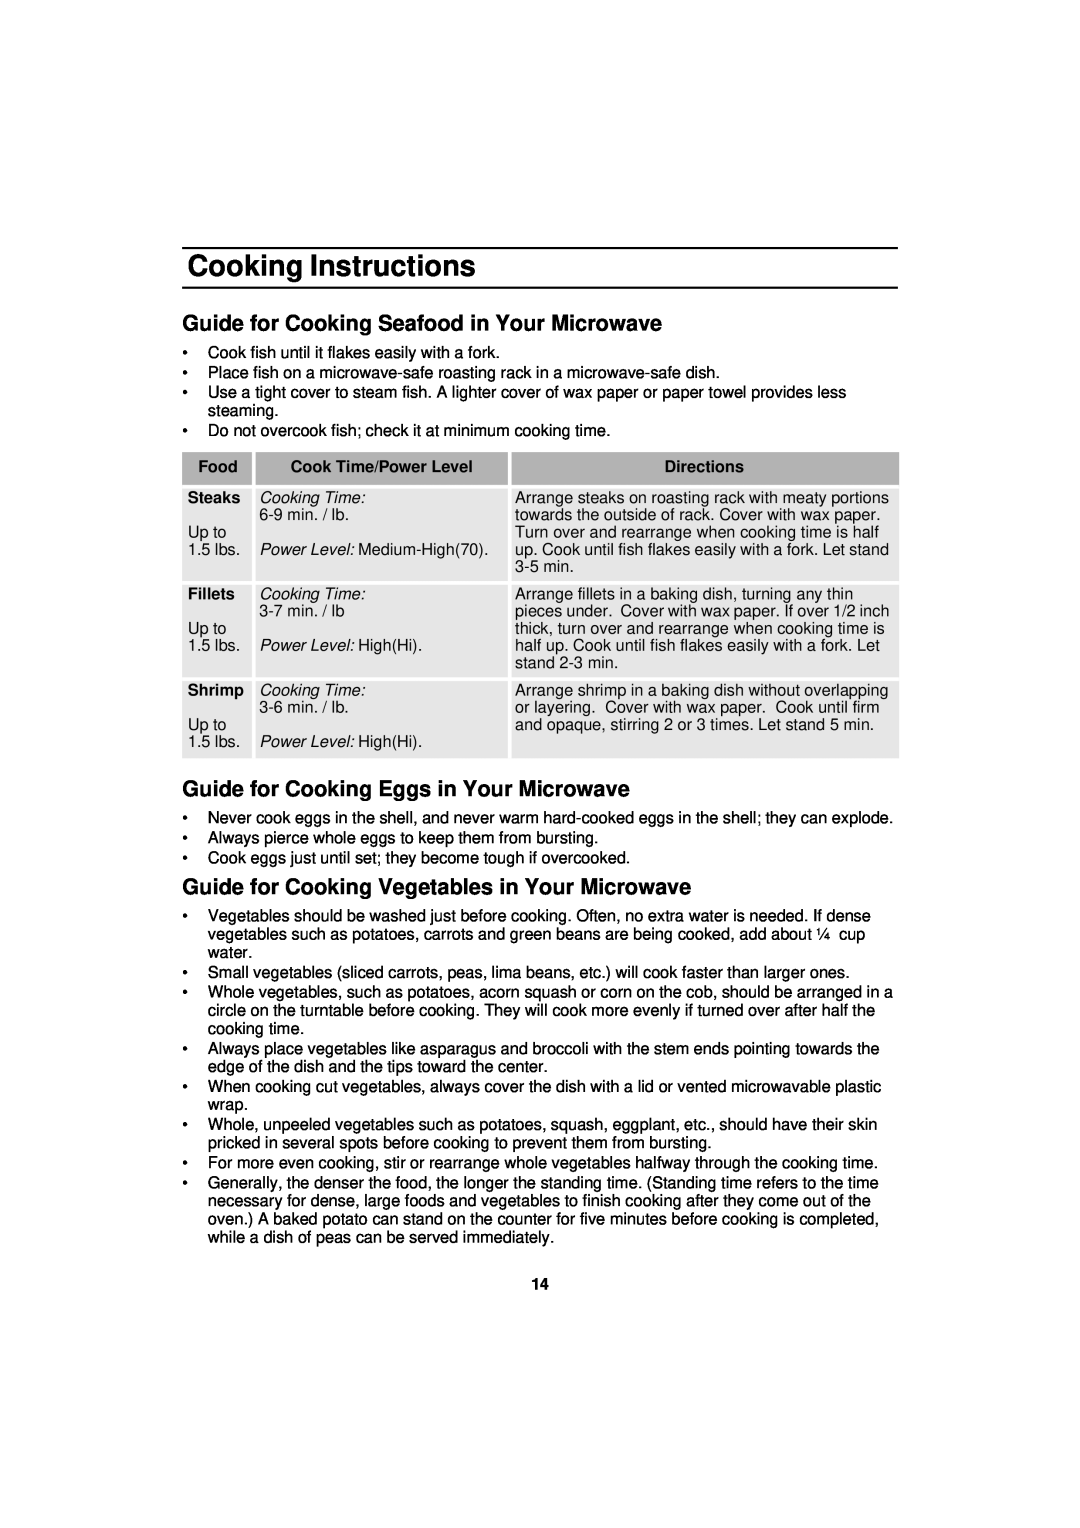 Samsung MW830BA manual Guide for Cooking Seafood in Your Microwave, Guide for Cooking Eggs in Your Microwave 